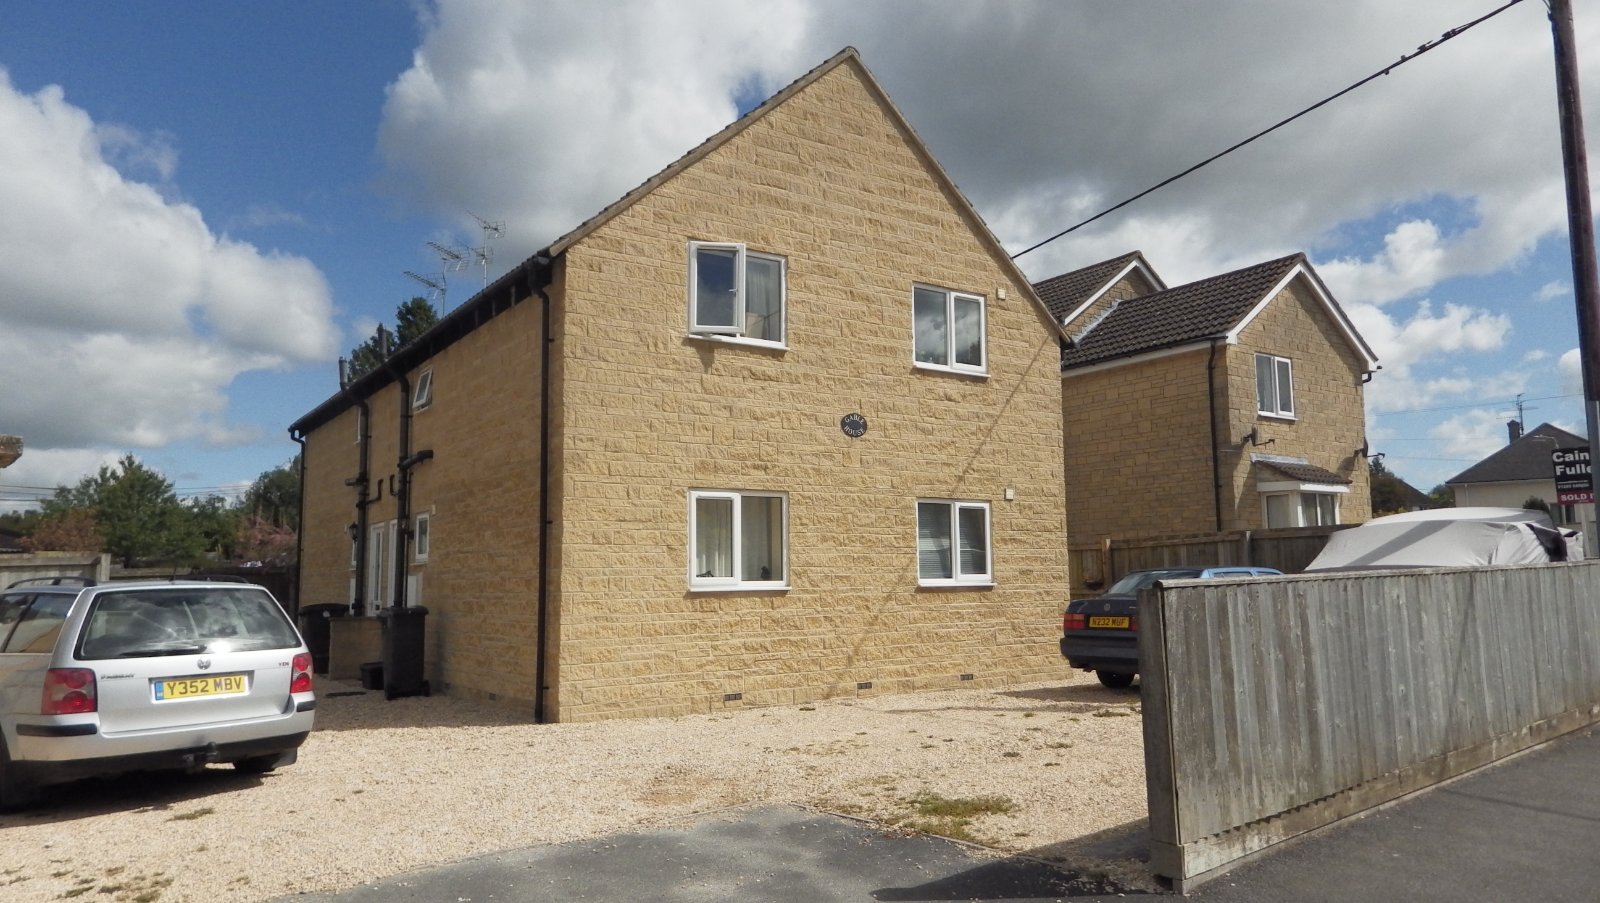 Bowling Green Road, Cirencester, Gloucestershire, GL7